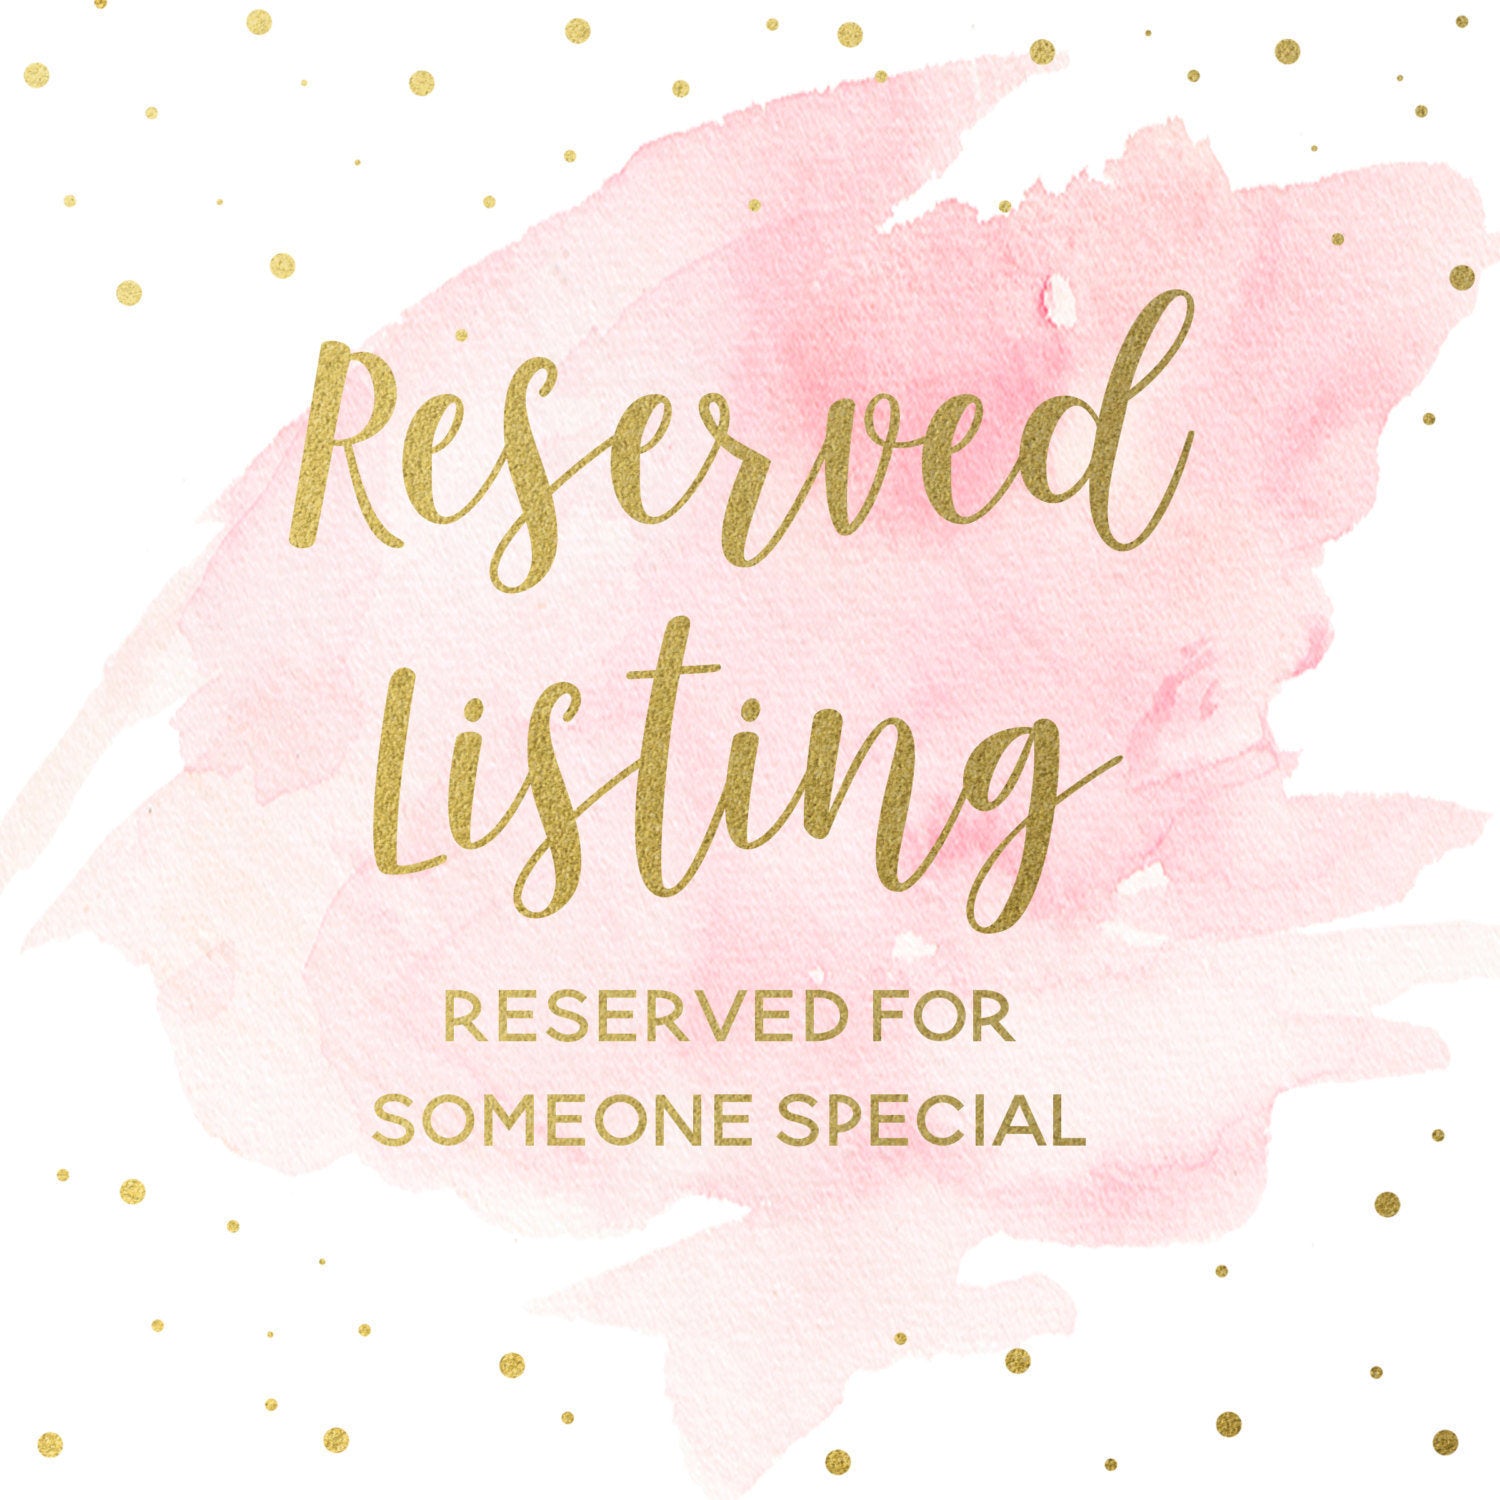 Reserved Listing - Ship